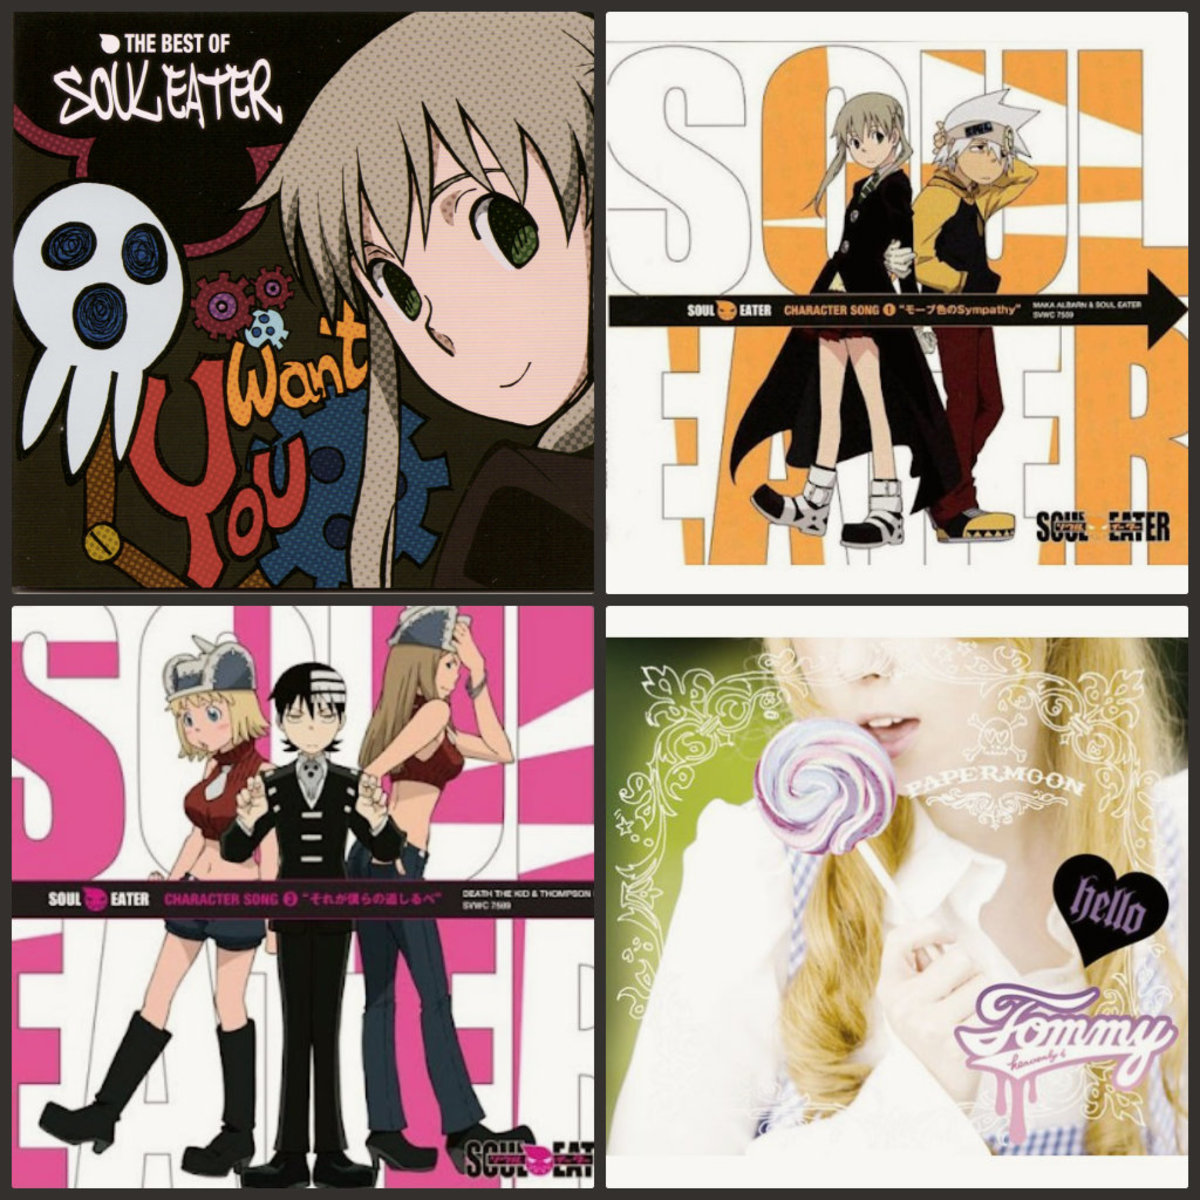 top left http://50.7.241.234:2880/album_images/soul-eater-the-best-of-soul-eater/Card%2001.jpg top right http://2.bp.blogspot.com/-14L-KFZEyN0/T_koOCrqGJI/AAAAAAAAHuM/c_iXGmixqSo/s400/big-soul-eater-character-song-1-mauve-iro-no-sympathy-ost.jpg